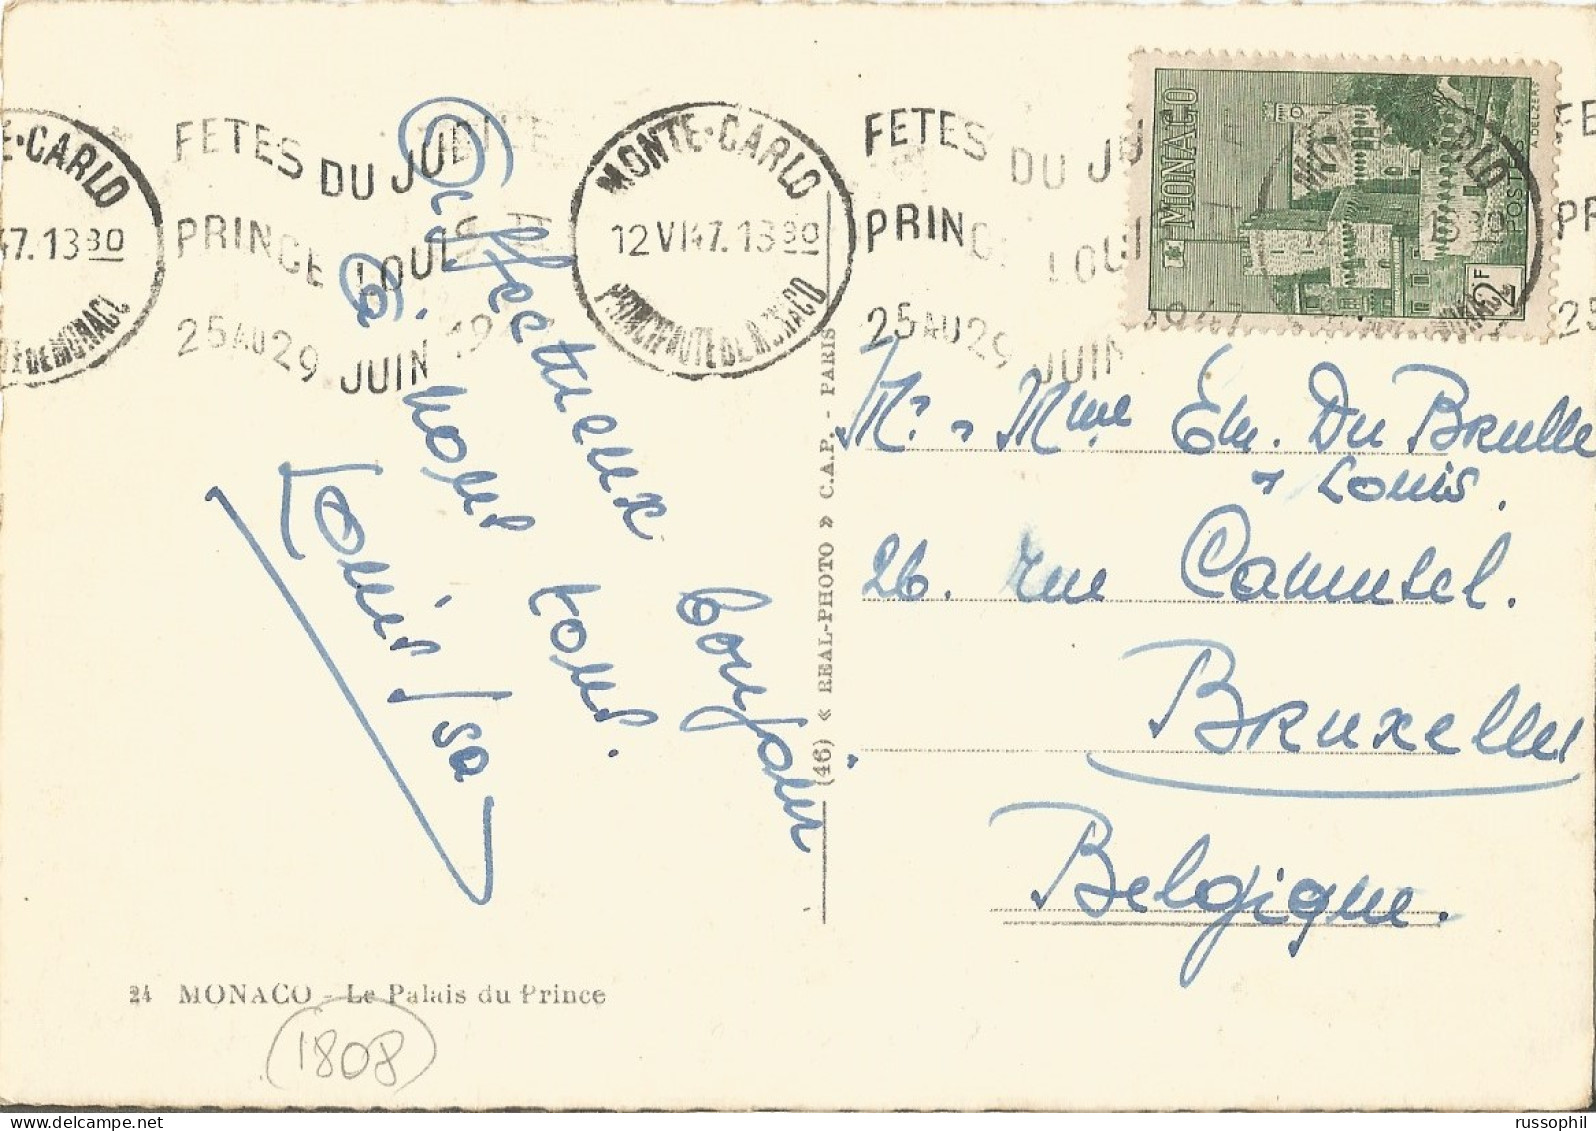 MONACO - "JUBILE 1947" KRAG DEPARTURE PMK CANCELLING Yv #277  ALONE  FRANKING PC (VIEW OF MONACO) TO BELGIUM - 1947 - Covers & Documents